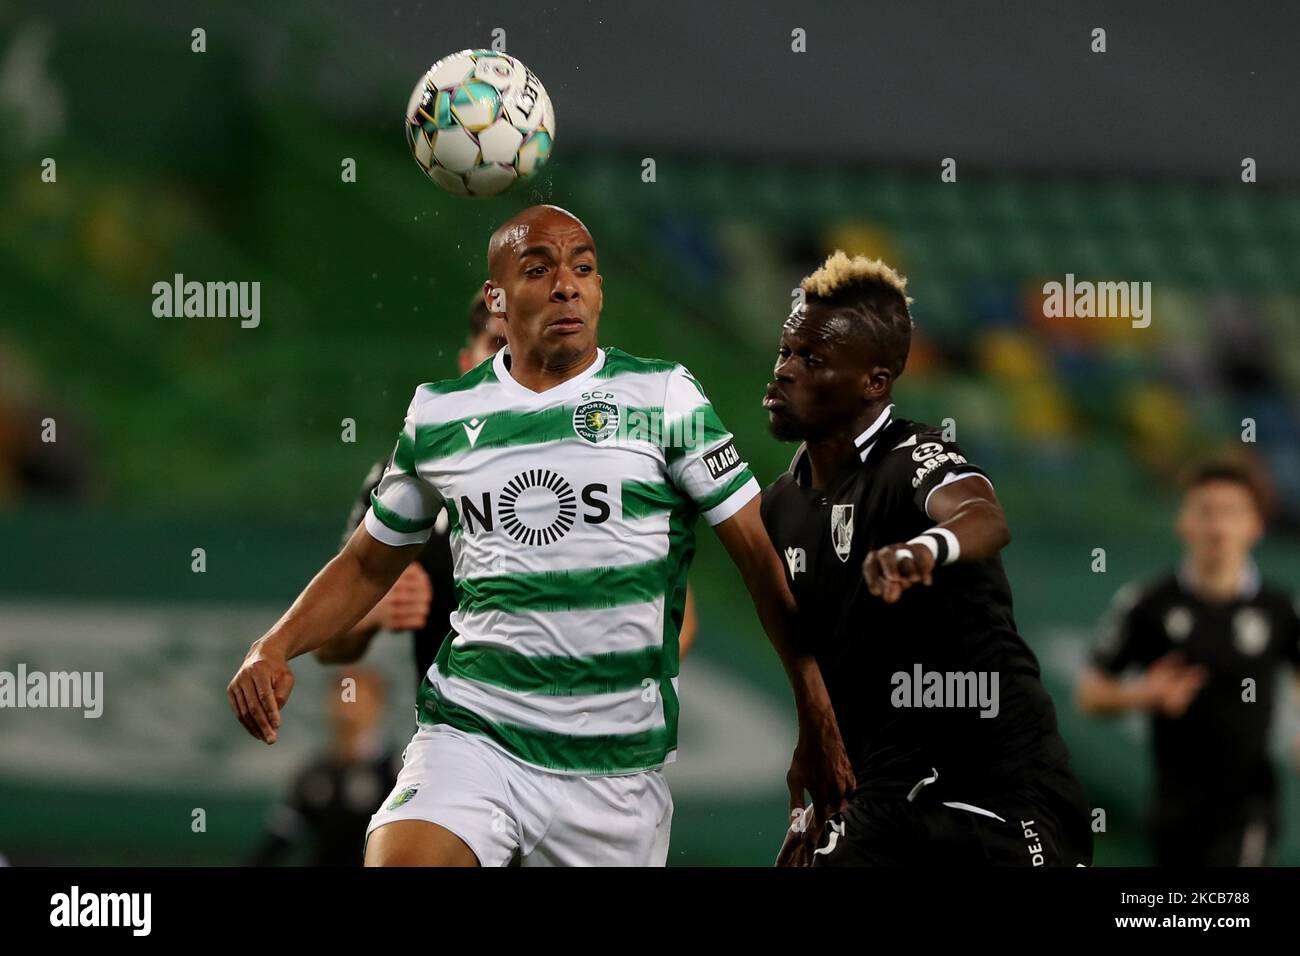 Joao Mario of Sporting CP (L) vies with Falaye Sacko of Vitoria SC during the Portuguese League football match between Sporting CP and Vitoria SC at Jose Alvalade stadium in Lisbon, Portugal on March 20, 2021. (Photo by Pedro FiÃºza/NurPhoto) Stock Photo